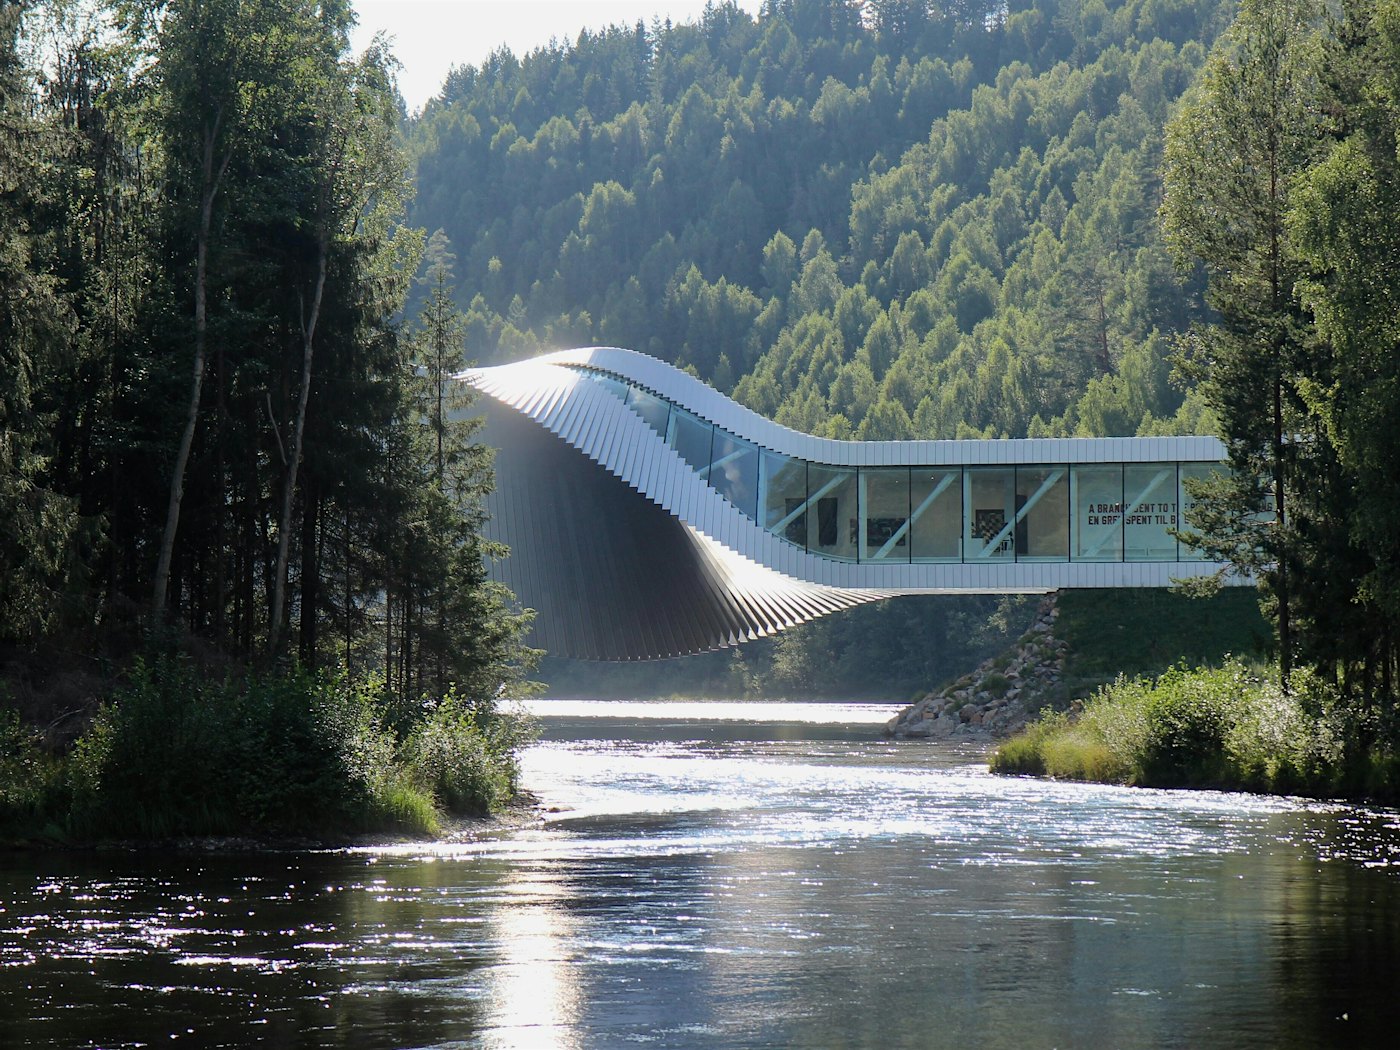 Building with special architecture that stretches over a river, surrounded by forest. Photo